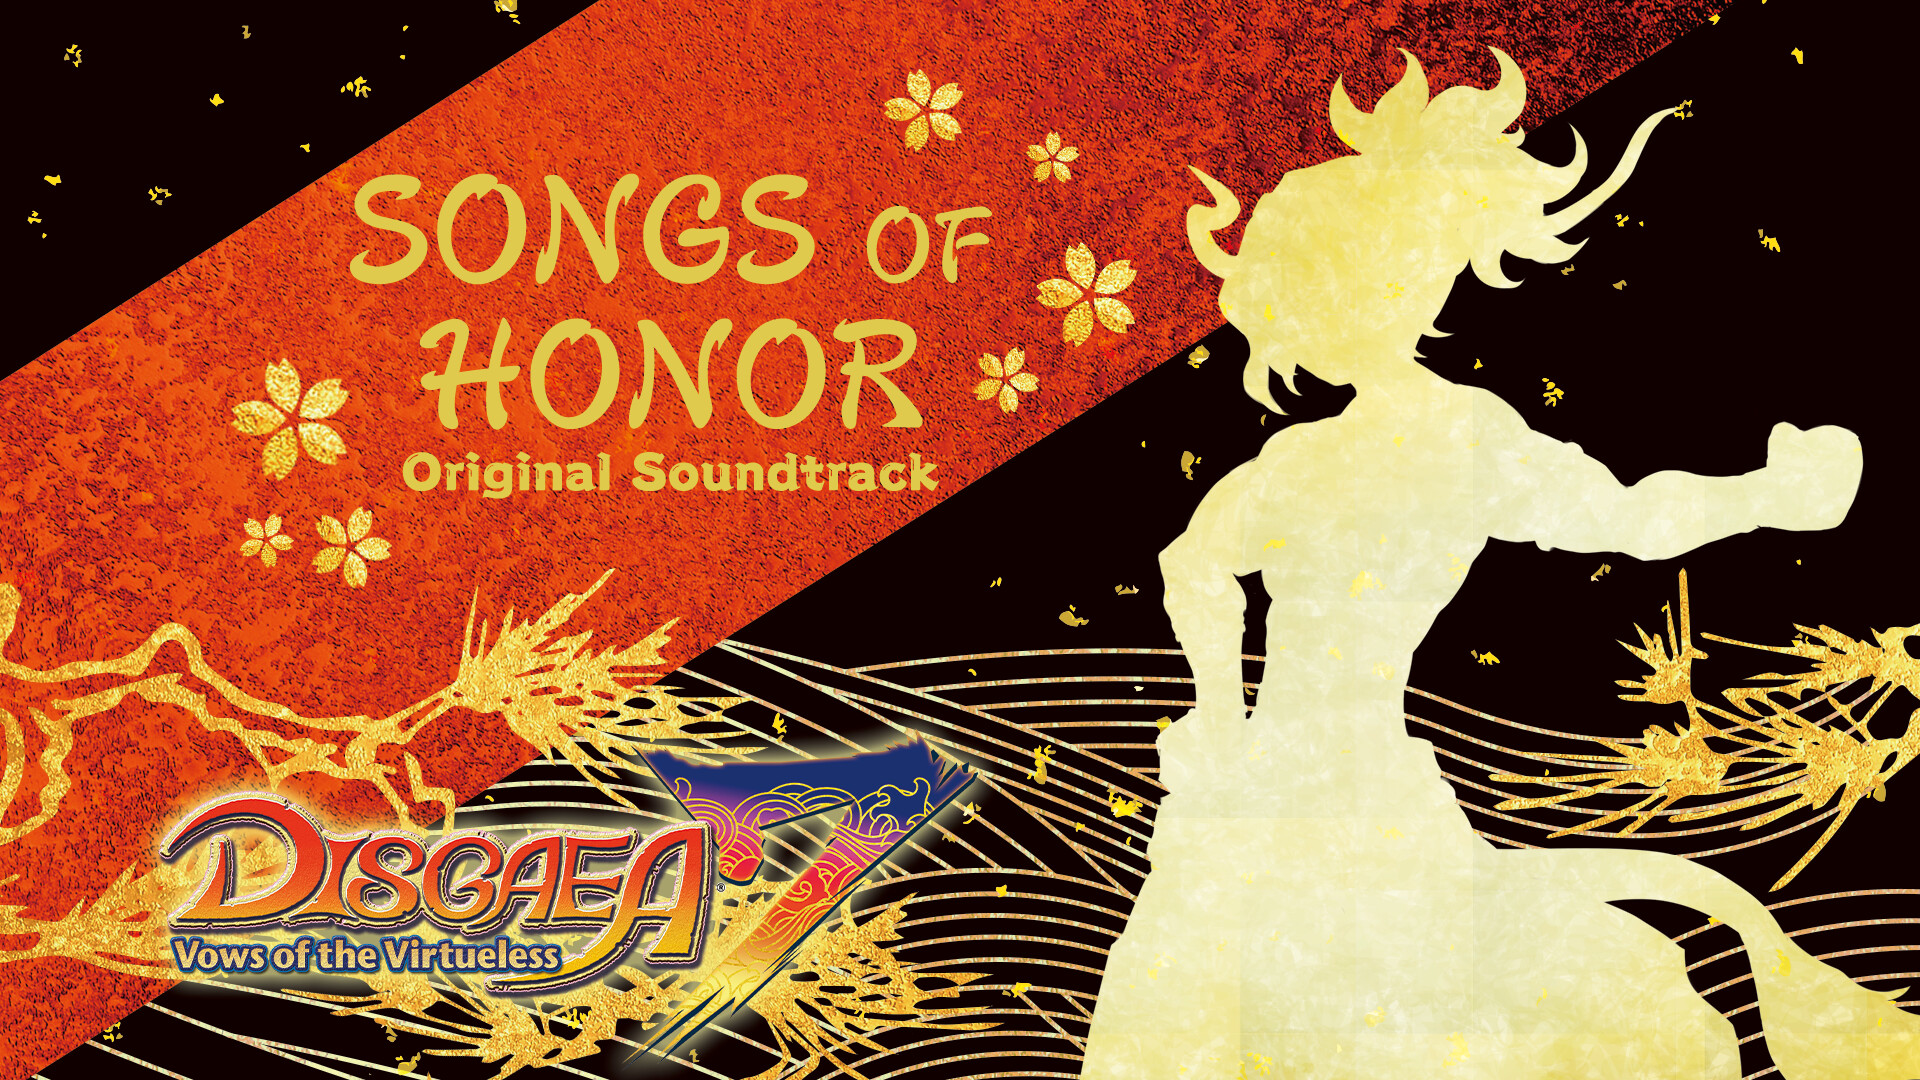 Disgaea 7: Vows of the Virtueless - Soundtrack Featured Screenshot #1